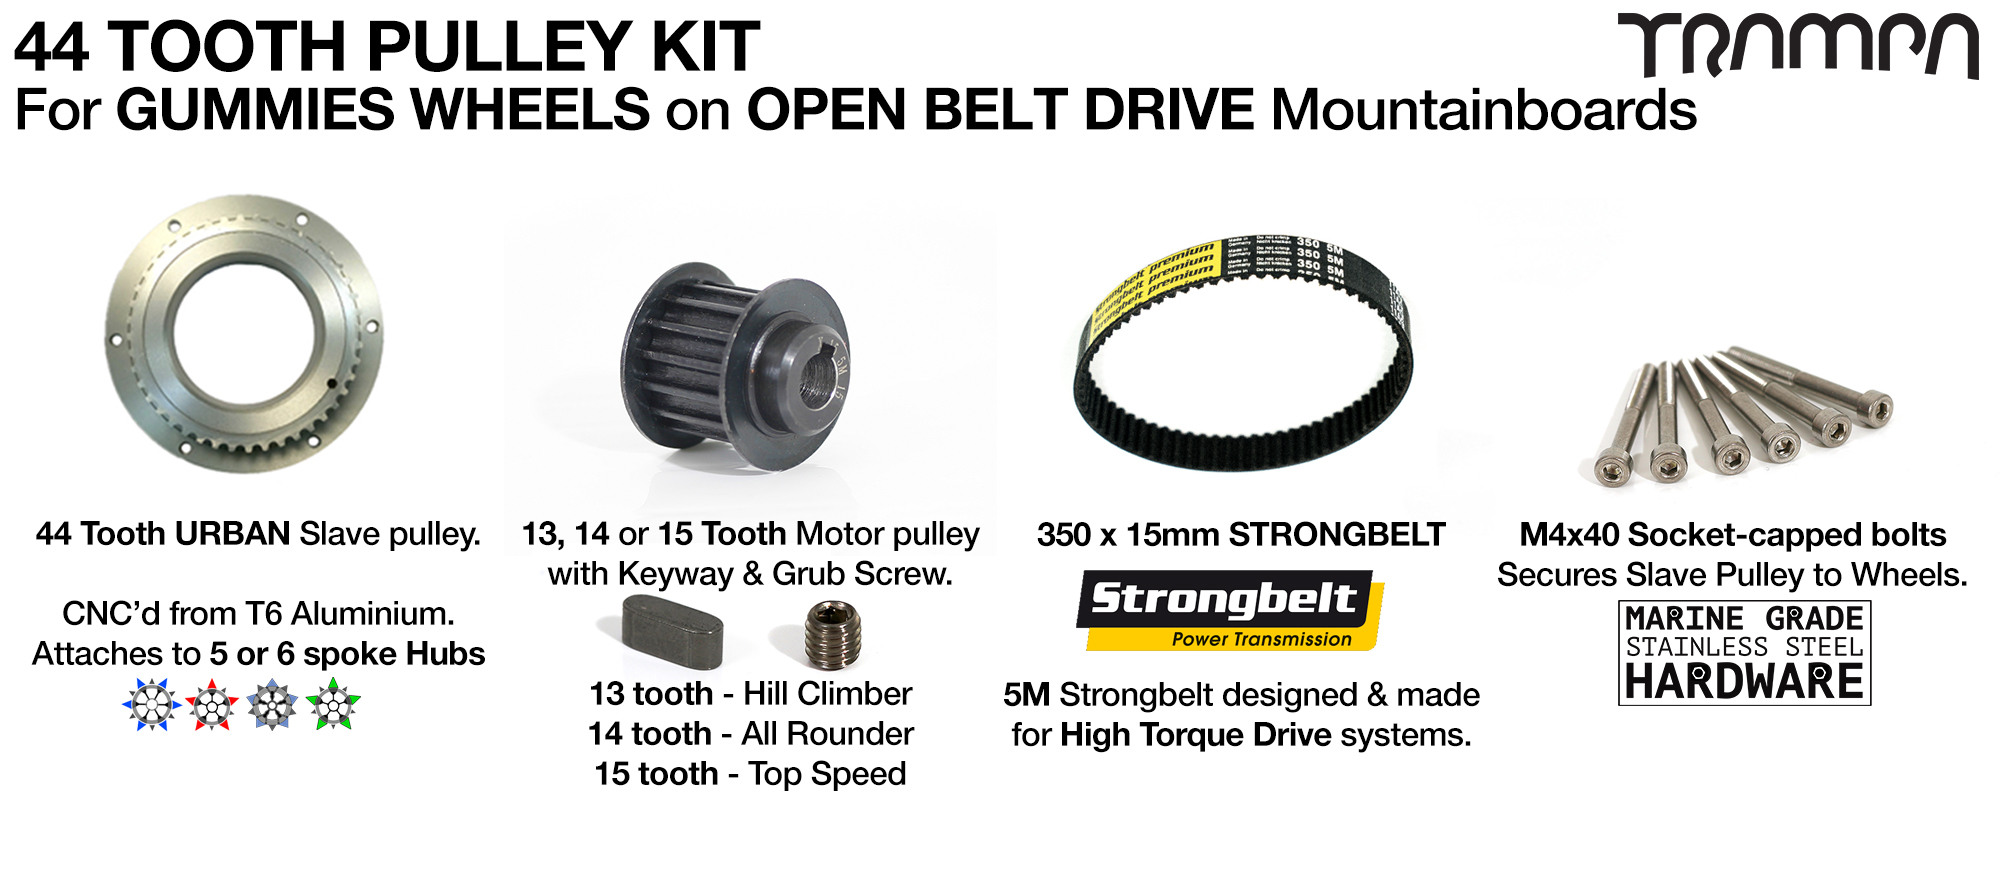 44 Tooth Pulley Kit